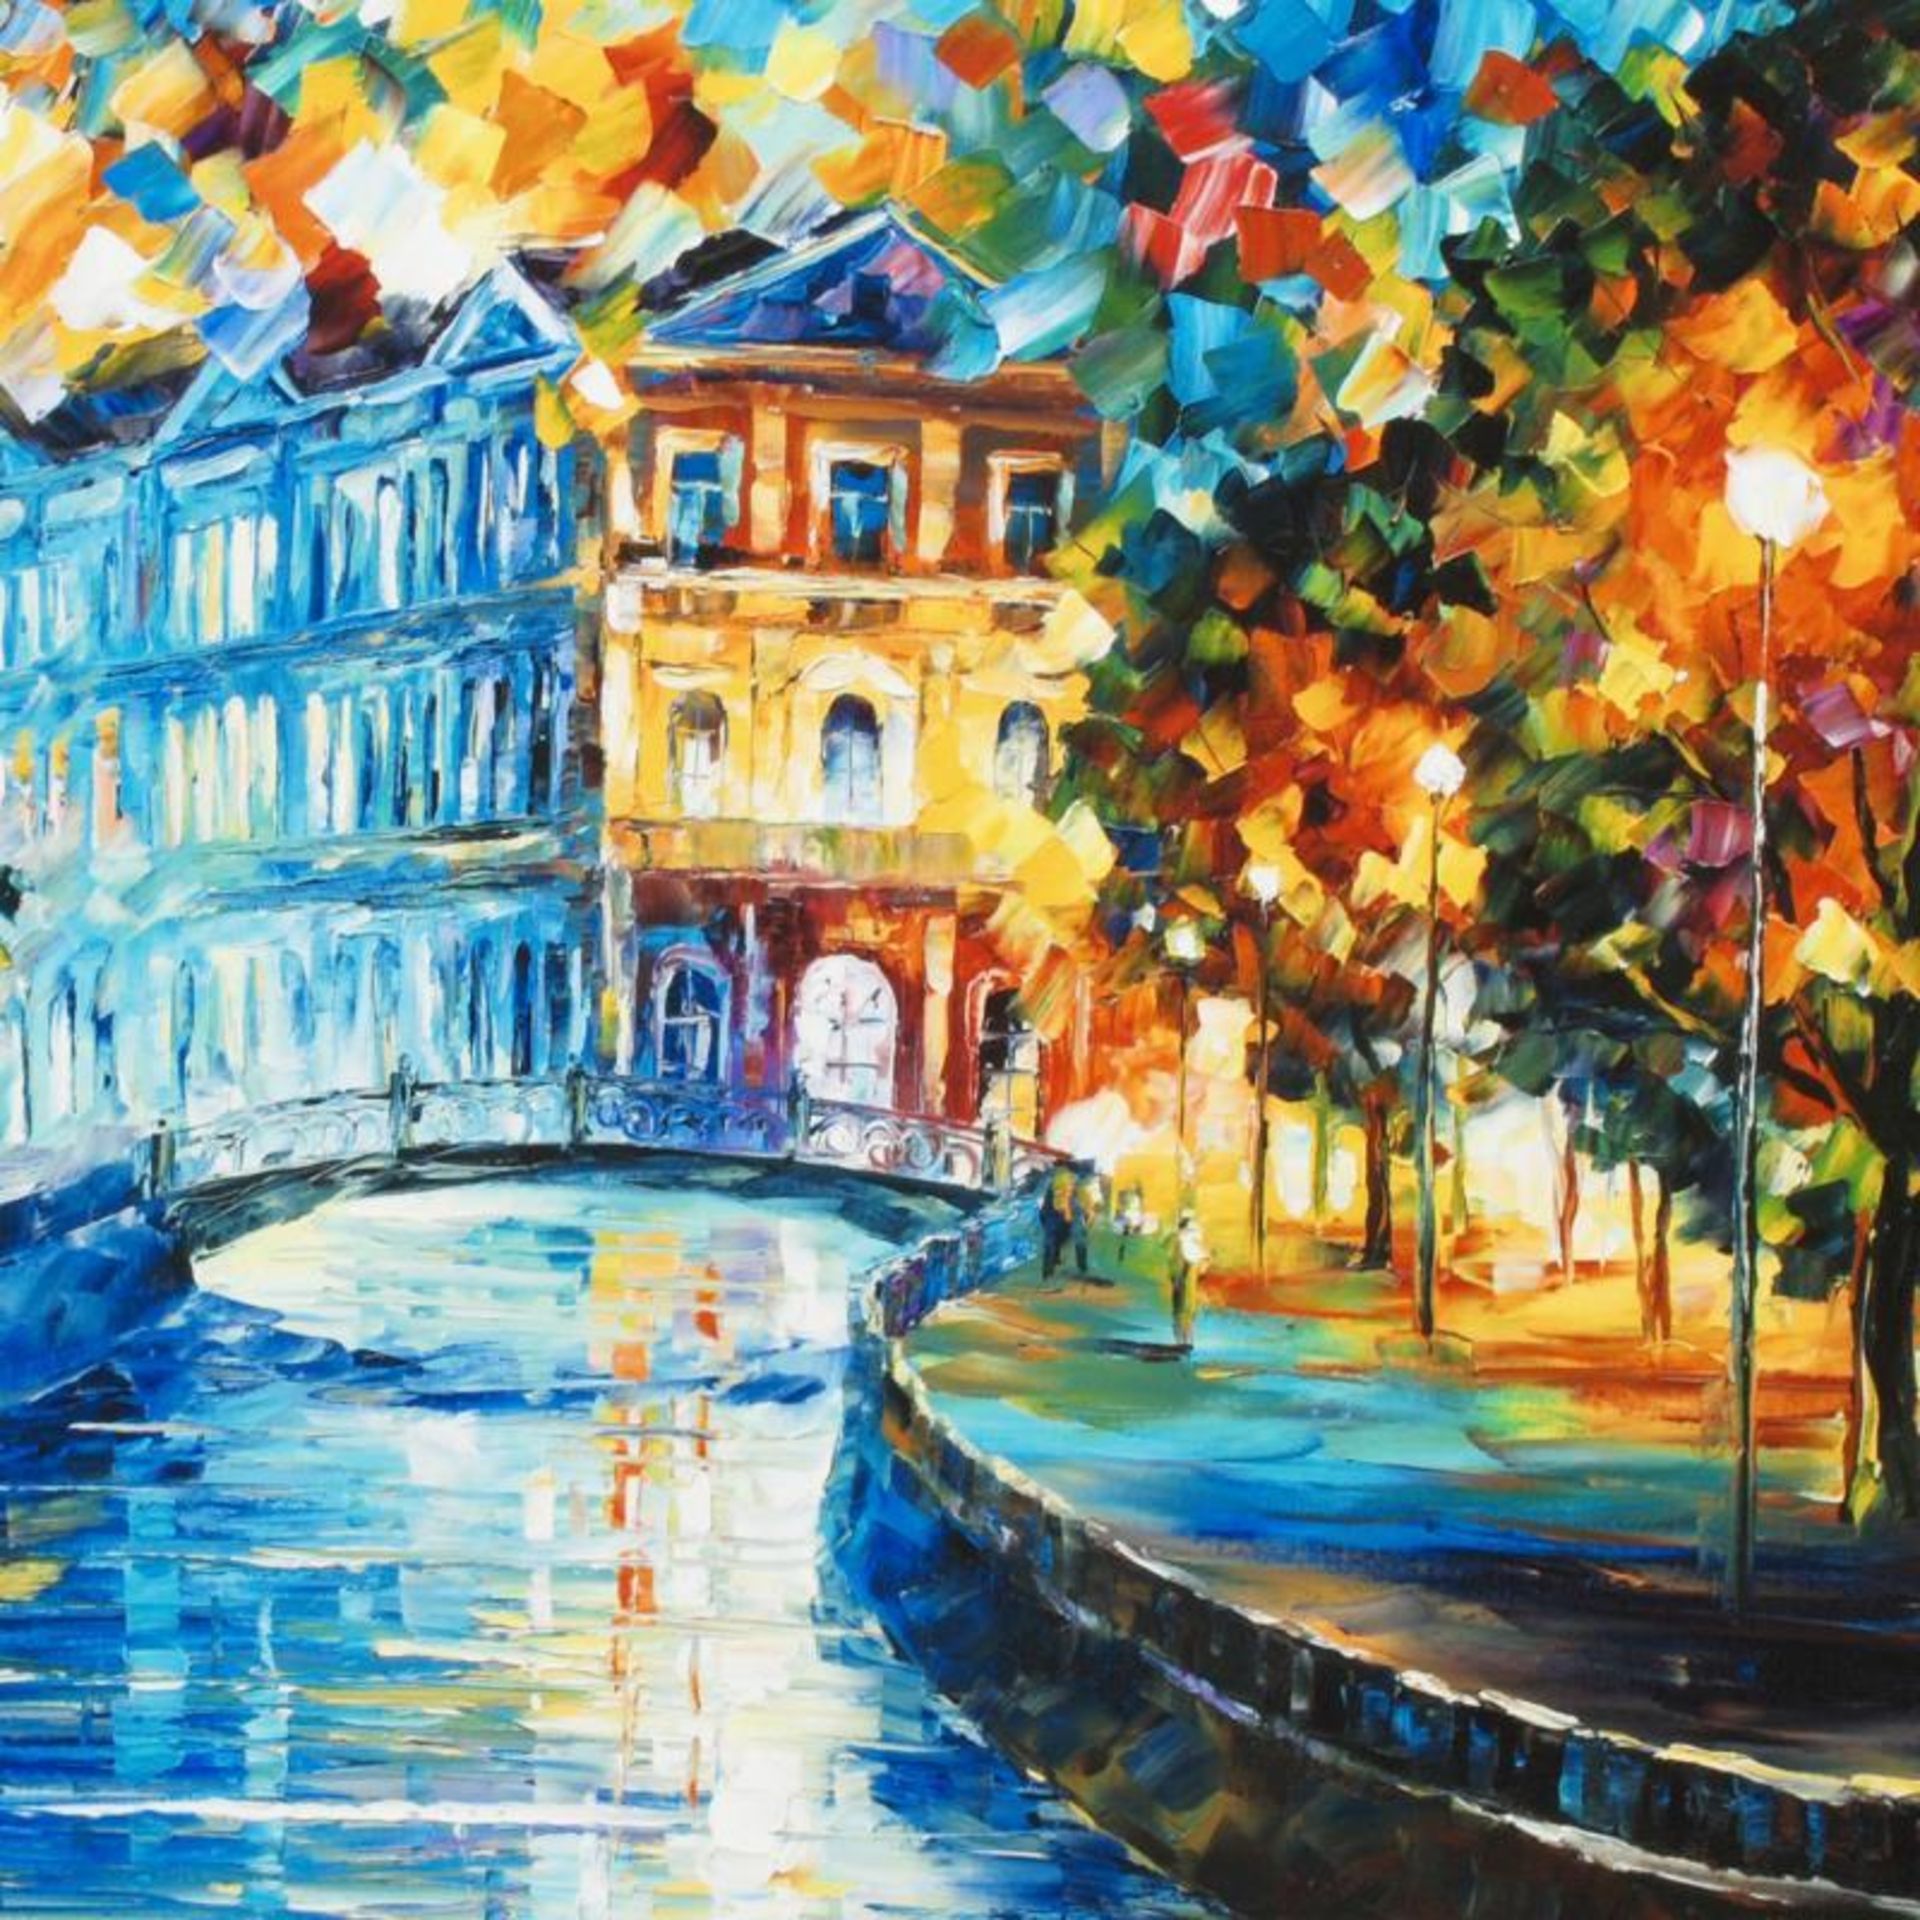 Leonid Afremov (1955-2019) "House on the Hill" Limited Edition Giclee on Canvas, - Image 2 of 3